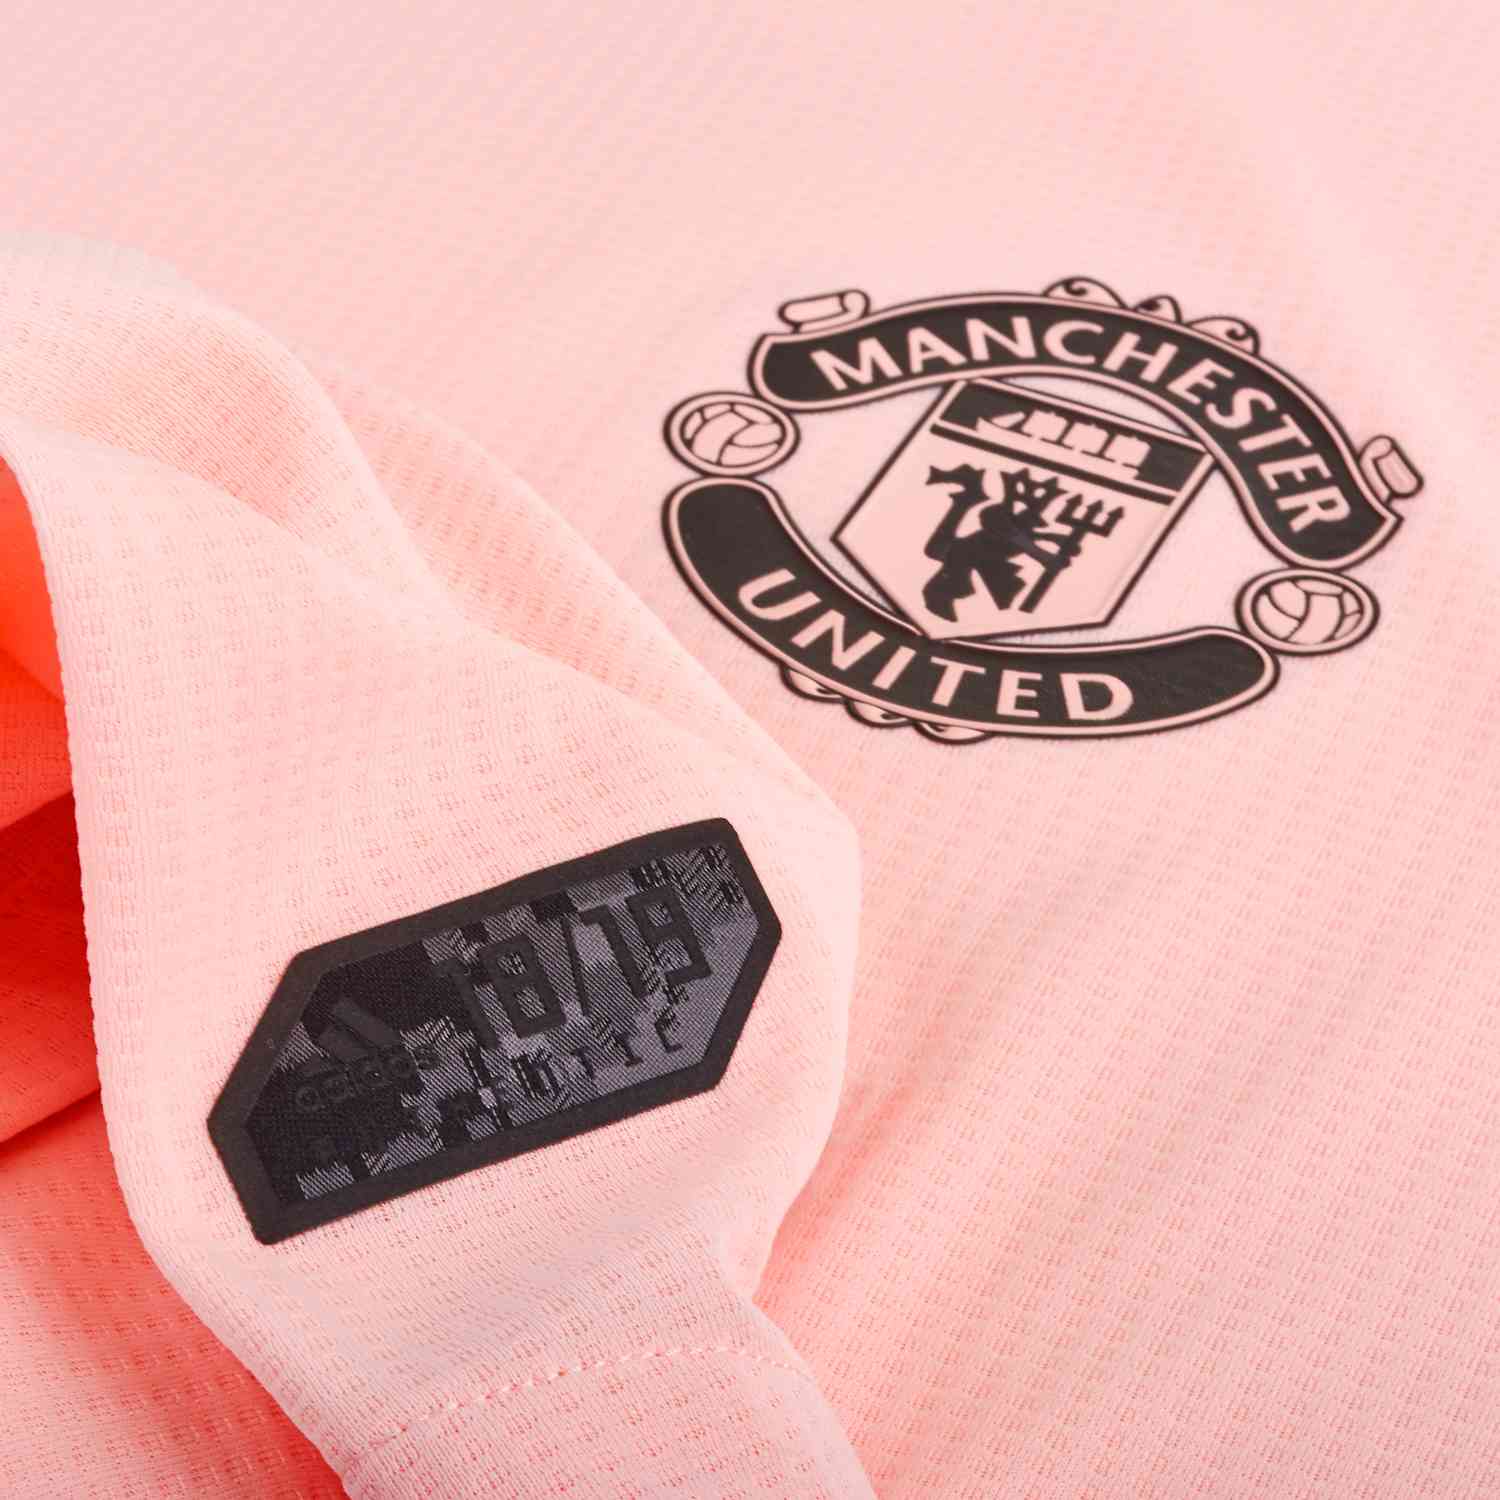 man united official jersey